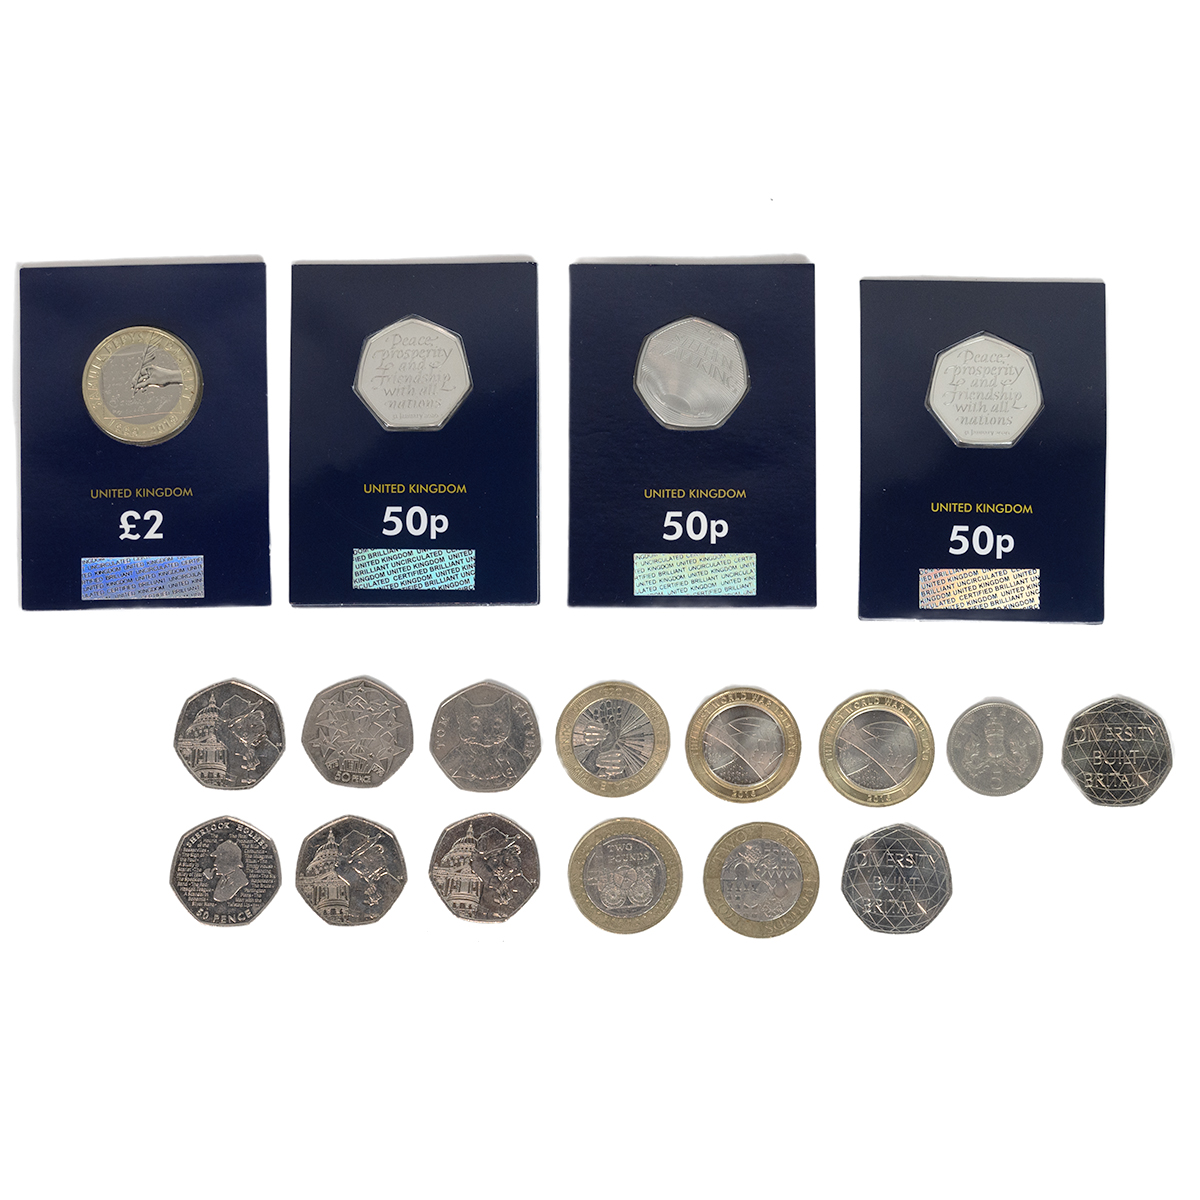 A collection of modern collectors coins sets and parts sets, including "Datestamp" 2021 United Ki... - Image 2 of 3